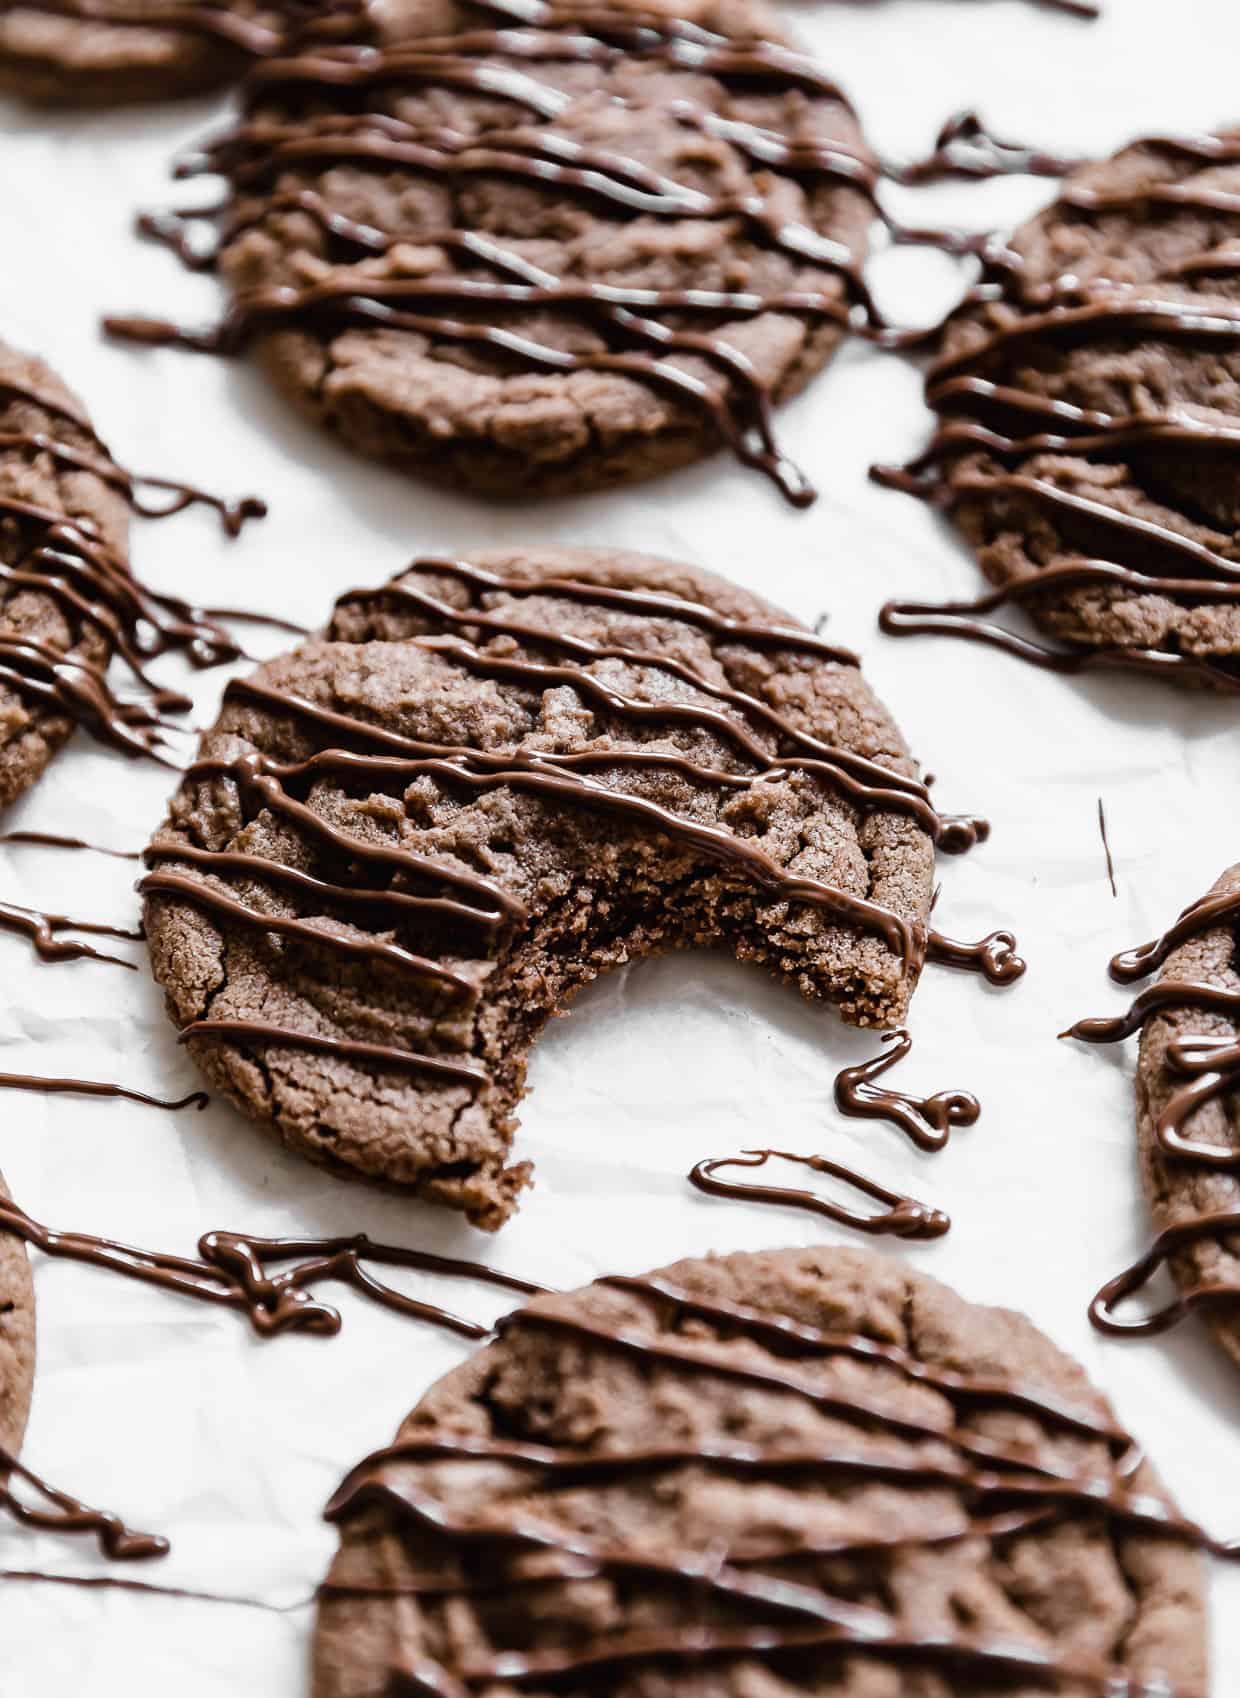 Nutella Cookies drizzled with Nutella and a bite taken out of it.